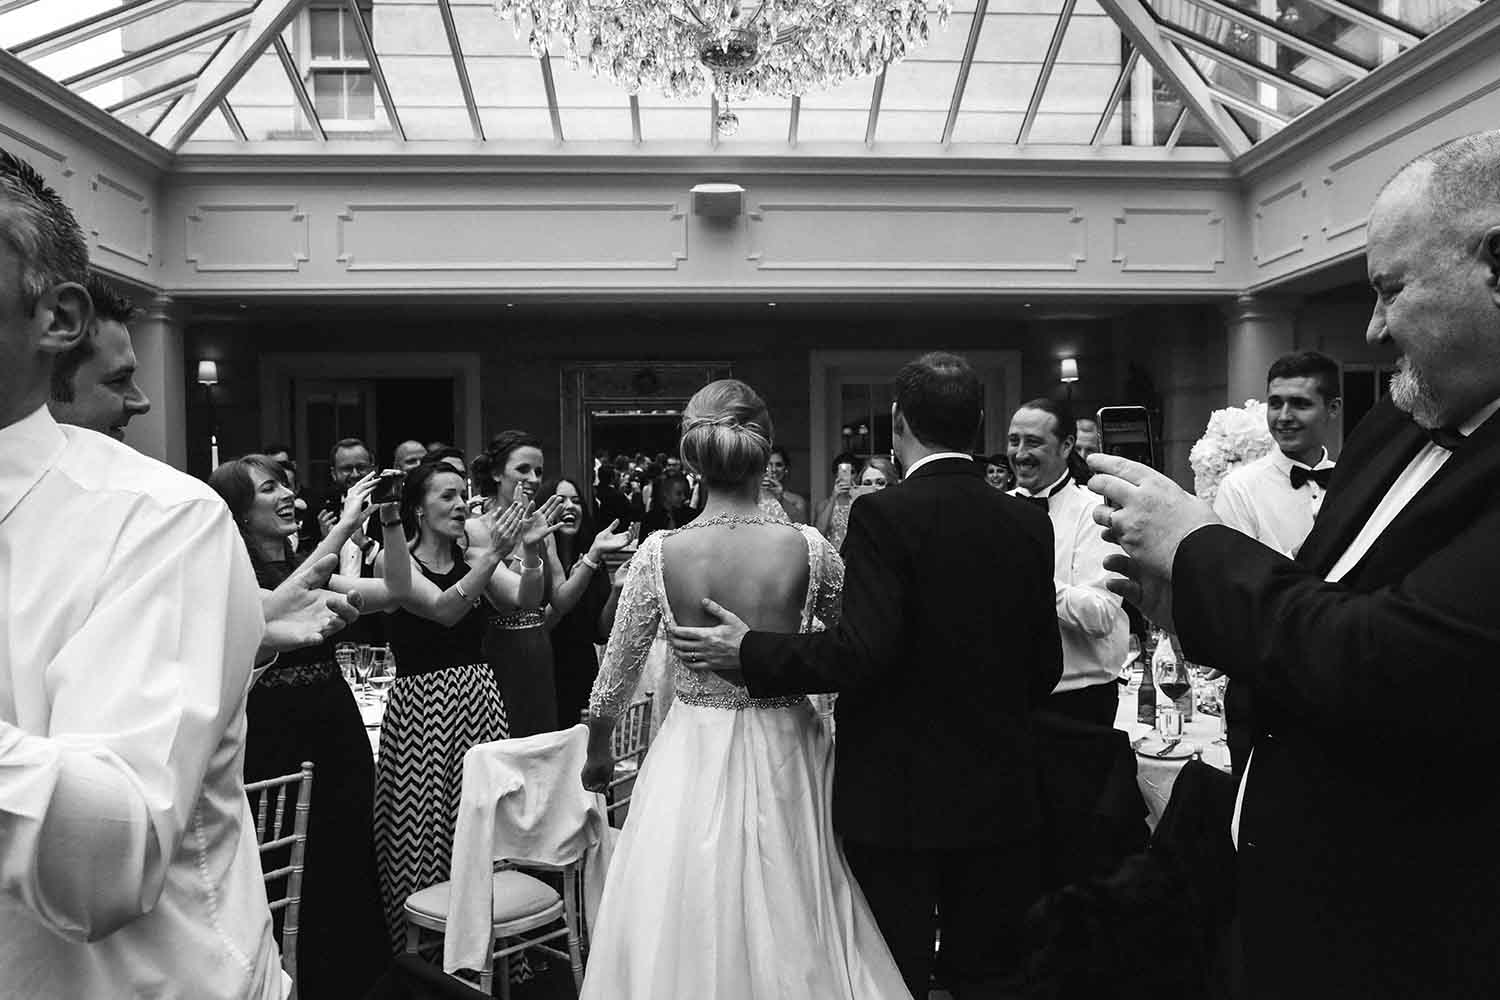 Couple enter the room for their wedding celebration at Tankardstown House